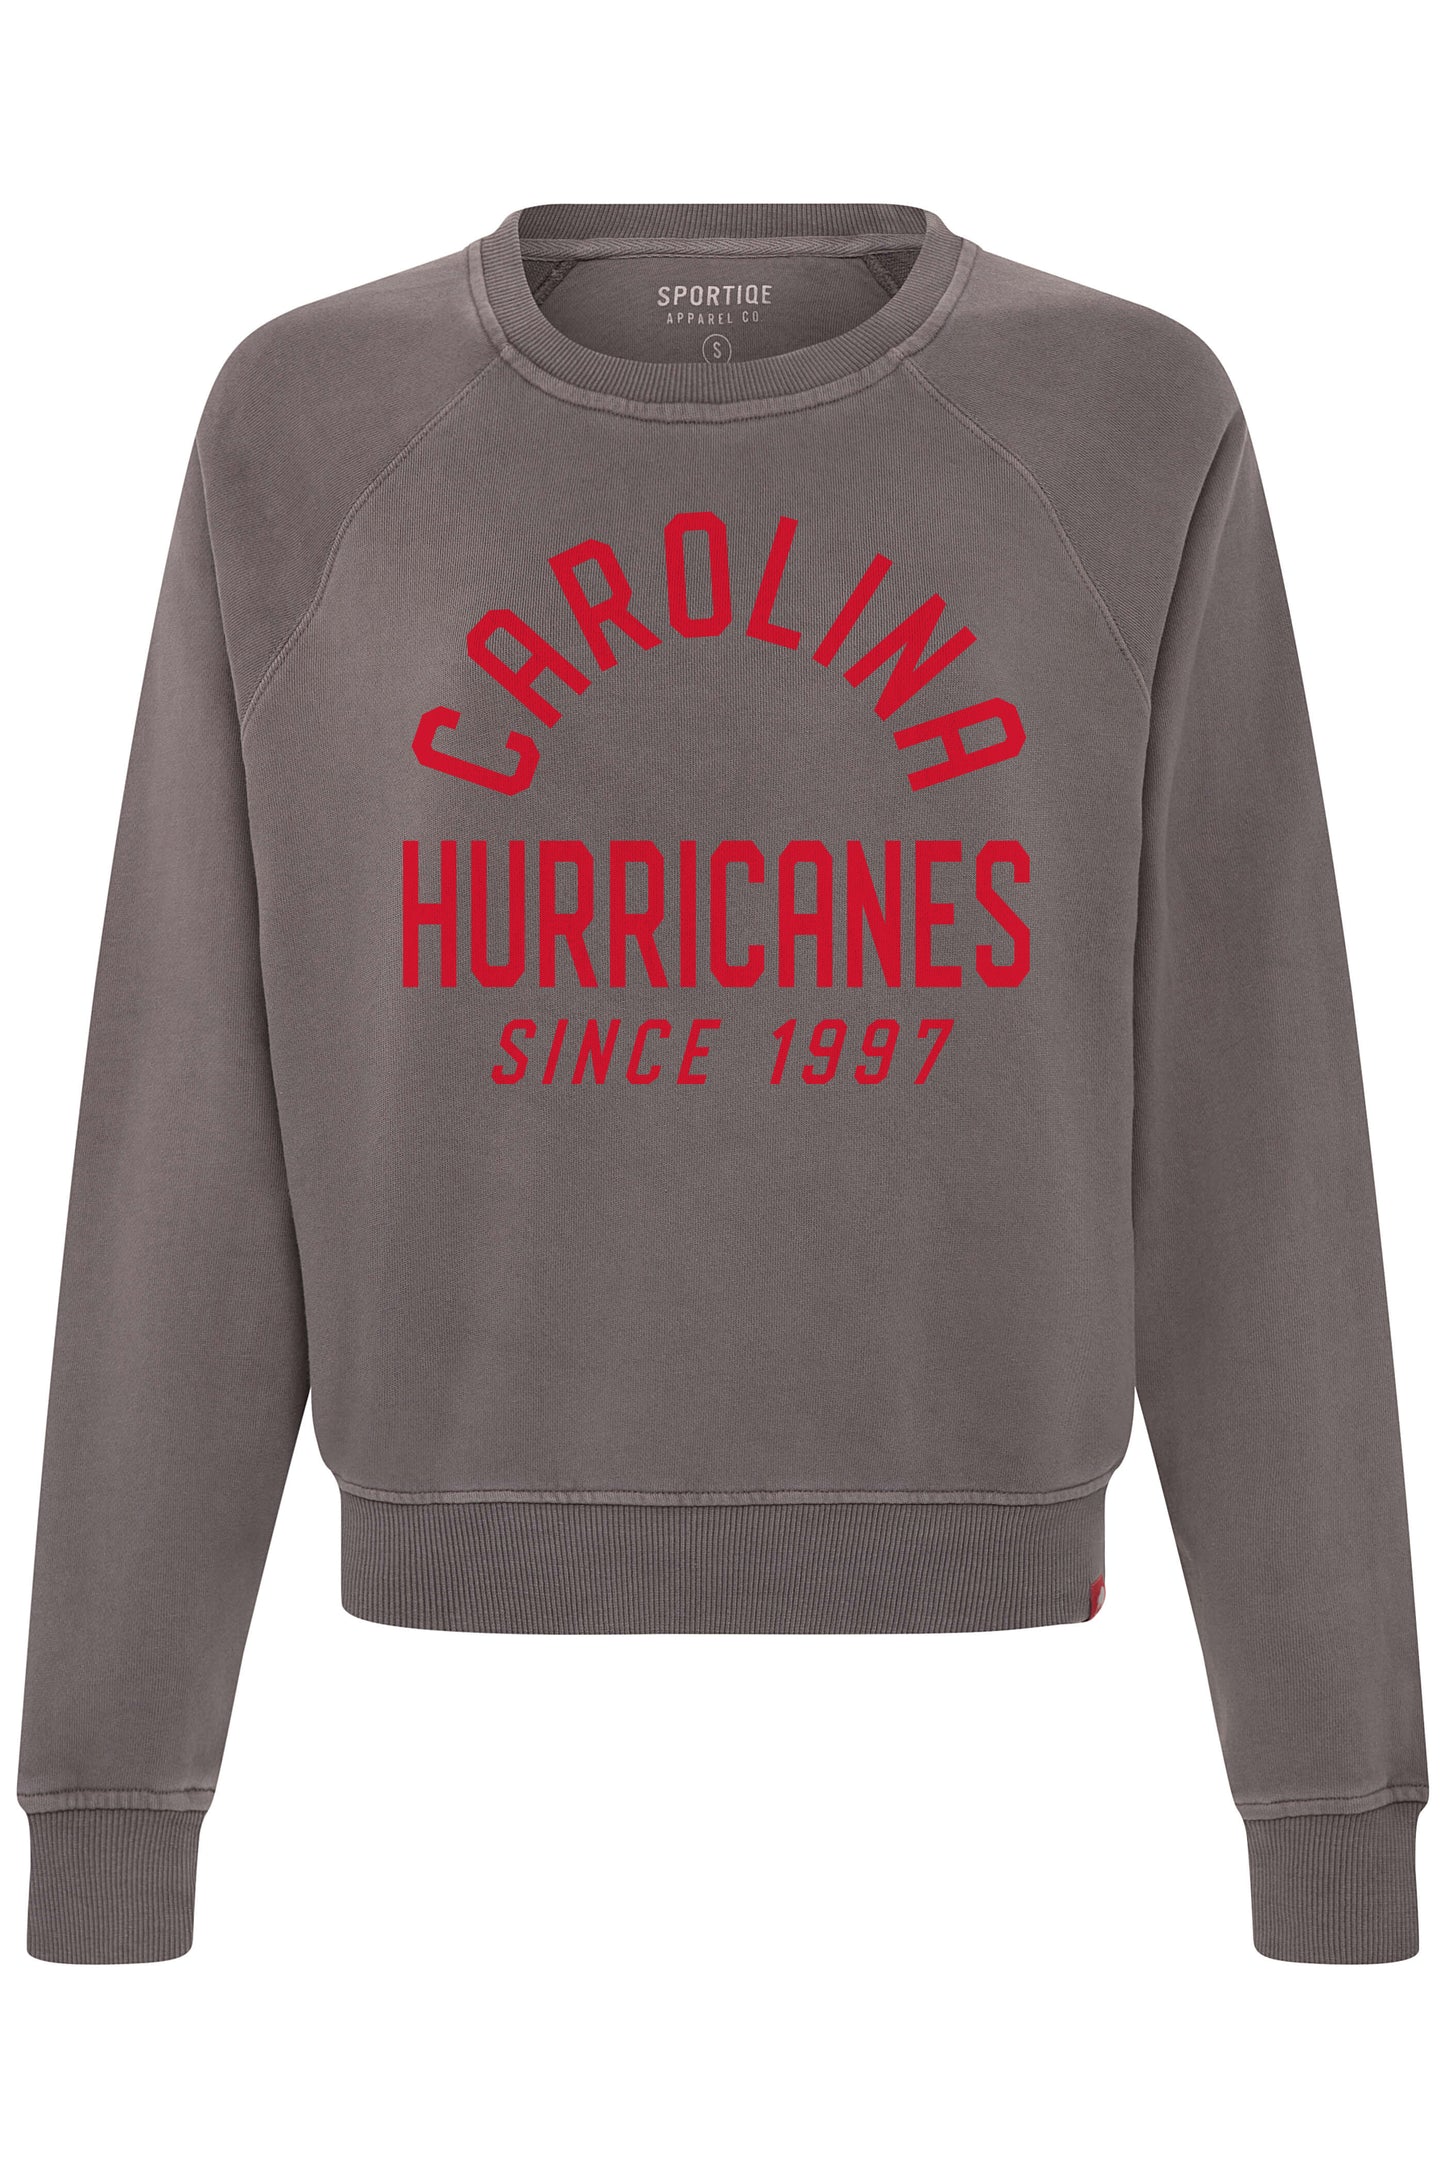 Grey crewneck with Carolina Hurricanes Since 1997 written in red on front.